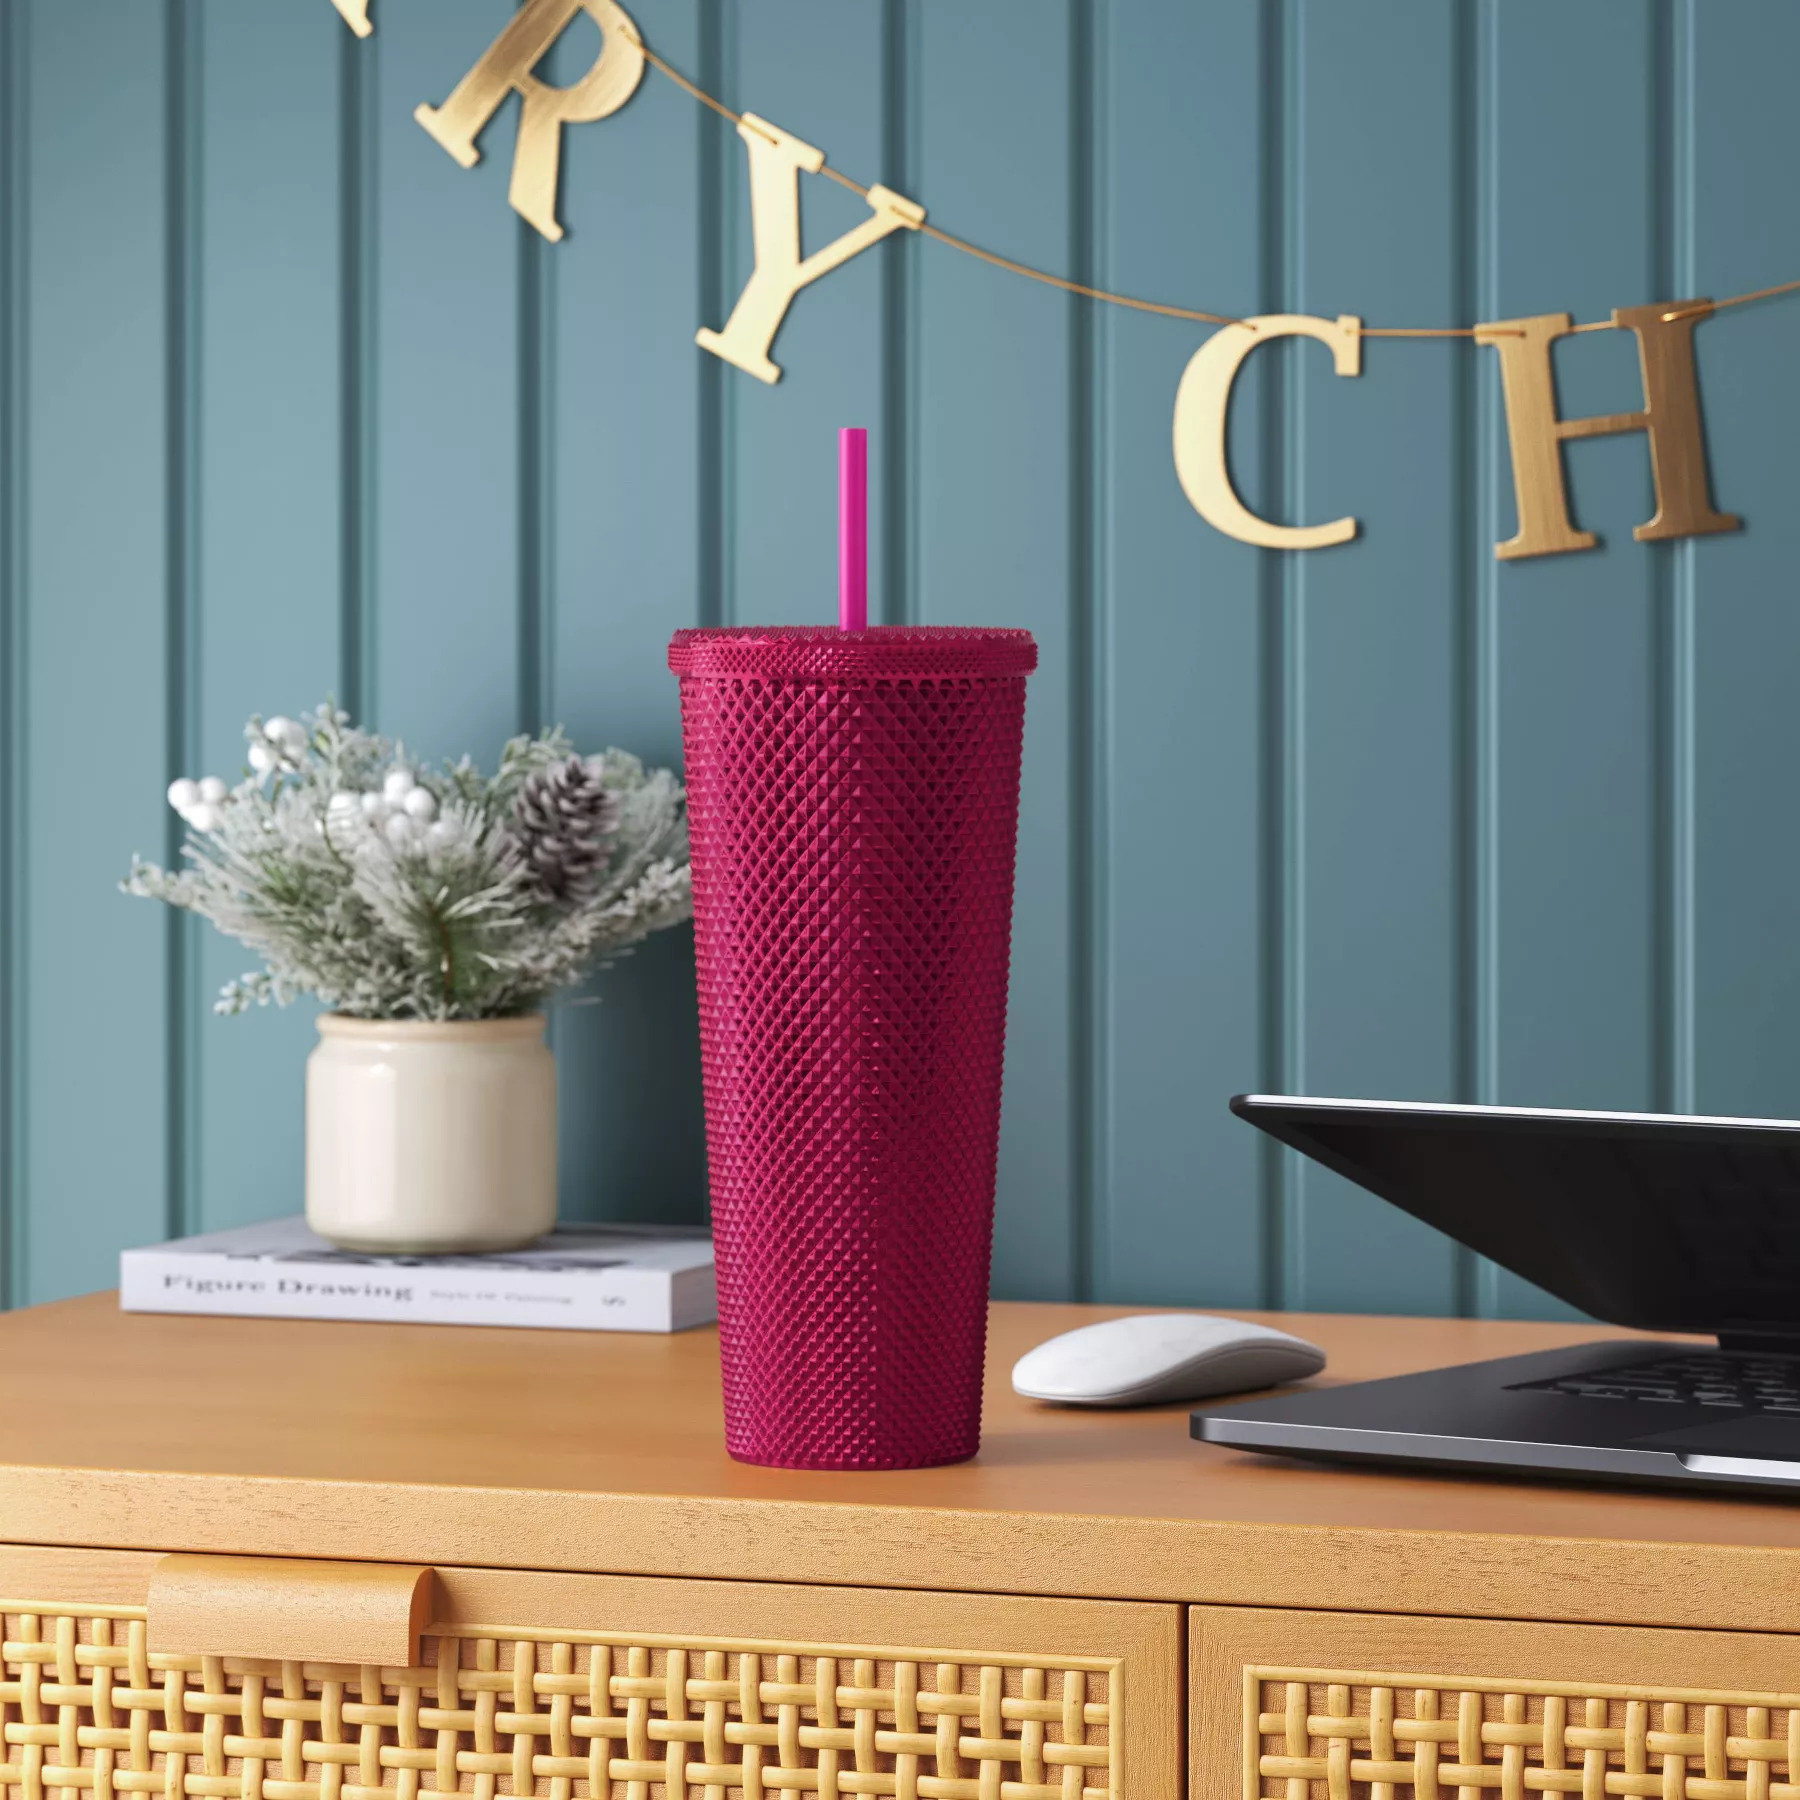 The tumbler with a lid and straw in a textured design